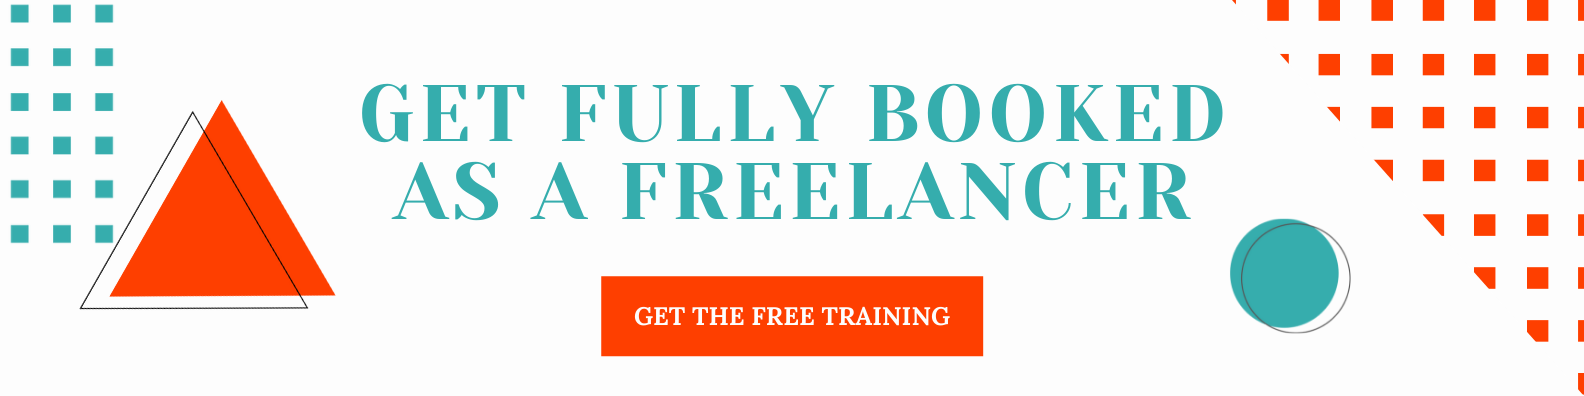 Geometric shapes in red-orange and teal with the words "Get Fully Booked as a Freelancer" in Teal above a red-orange button that says "Get the free training"